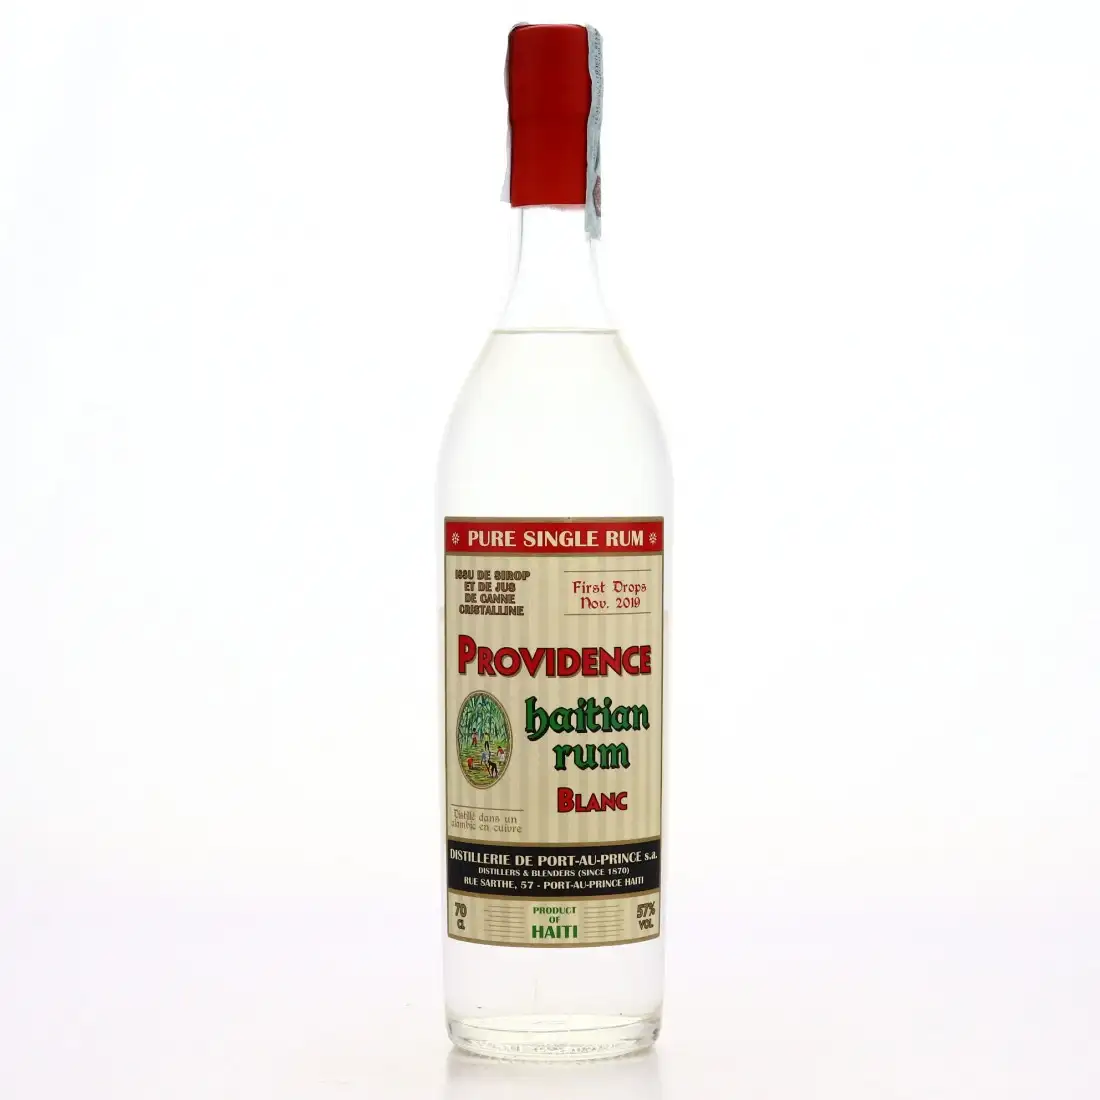 Image of the front of the bottle of the rum Providence Haitian Rum Blanc „First drops“